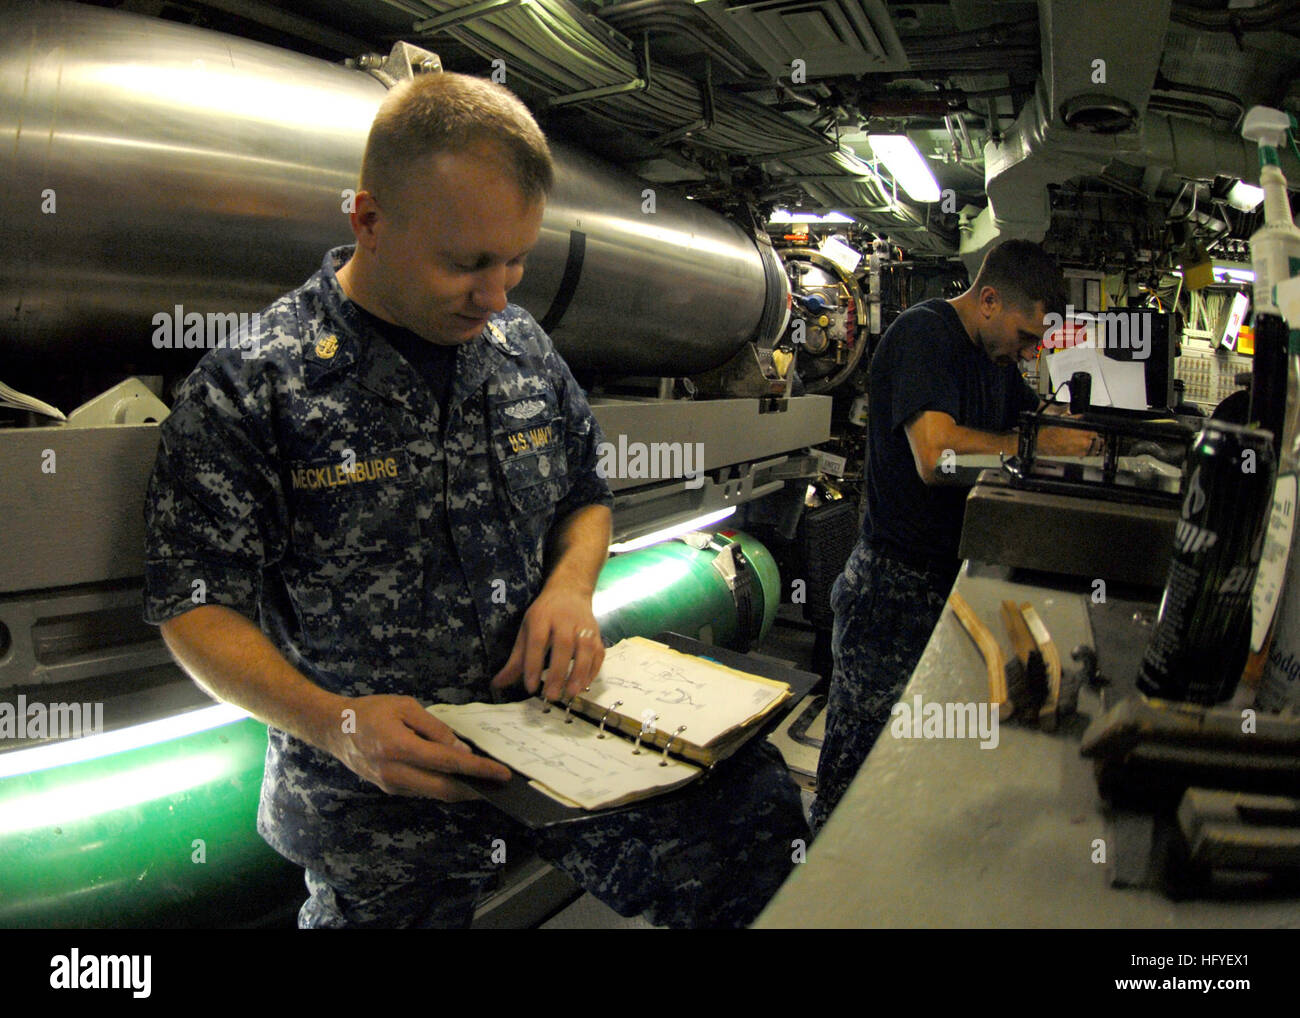 101013-N-7705S-010 NORFOLK (Oct. 13, 2010) Chief MachinistÕs Mate Tim Mecklenberg, from Killeen, Texas, verifies the maintenance procedures for torpedo room equipment aboard the Los Angeles-class attack submarine USS Norfolk (SSN 714). (U.S. Navy photo by Mass Communication Specialist 1st Class Todd A. Schaffer/Released) US Navy 101013-N-7705S-010 Chief Machinist's Mate Tim Mecklenberg, from Killeen, Texas, verifies the maintenance procedures for torpedo room equipm Stock Photo